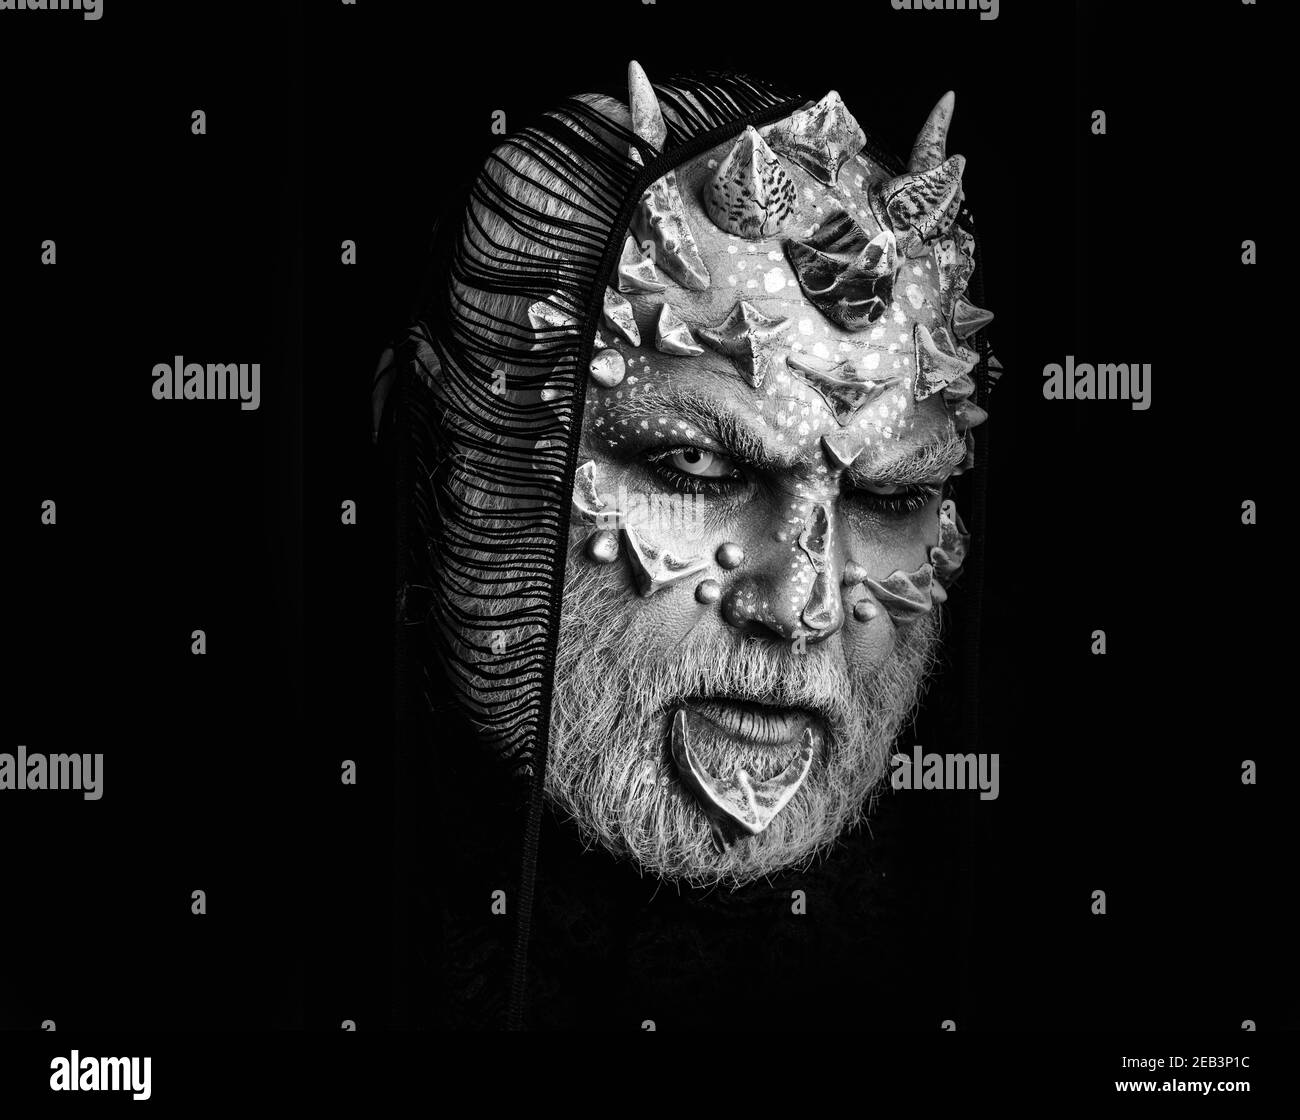 Devil man with fictional makeup. Demon with scarf on head isolated on black. Monster with white eyes and thorns on face. Alien with dragon skin and Stock Photo